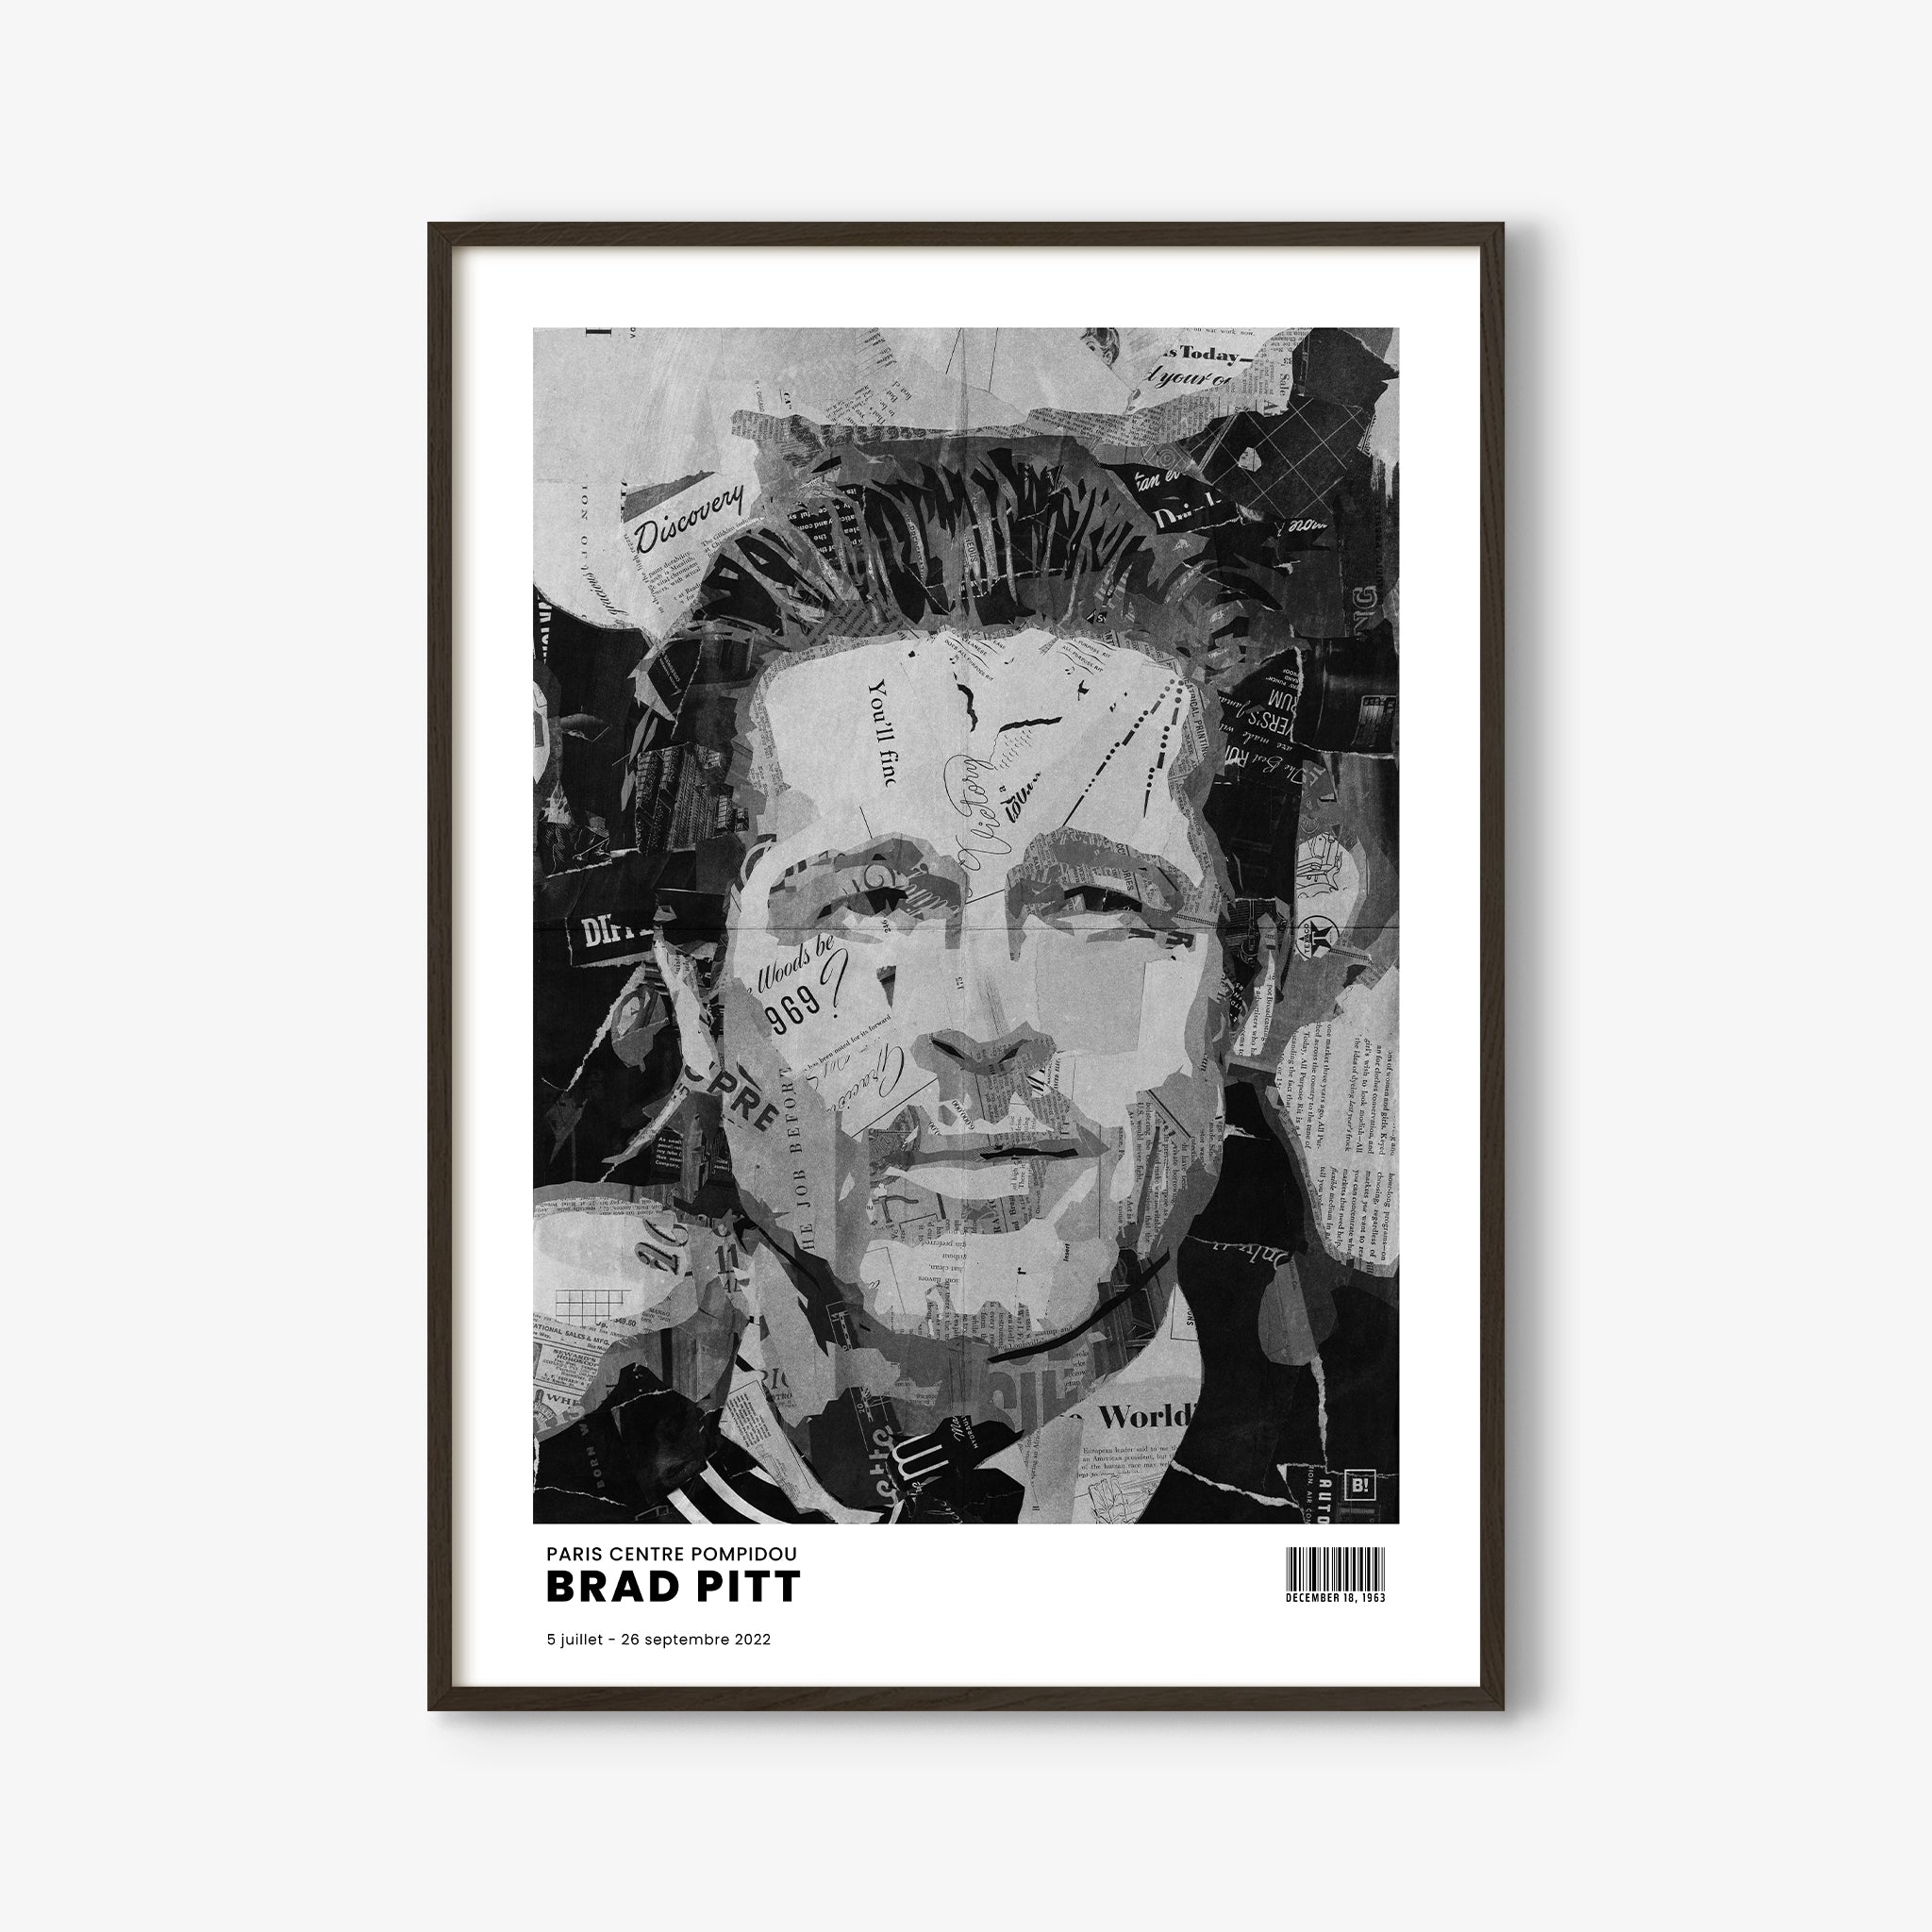 Be inspired by Iconic Brad Pitt Paris Centre Pompidou Exhibition Art Print. The artwork is presented in a black oak frame that captures its timeless beauty in every detail.